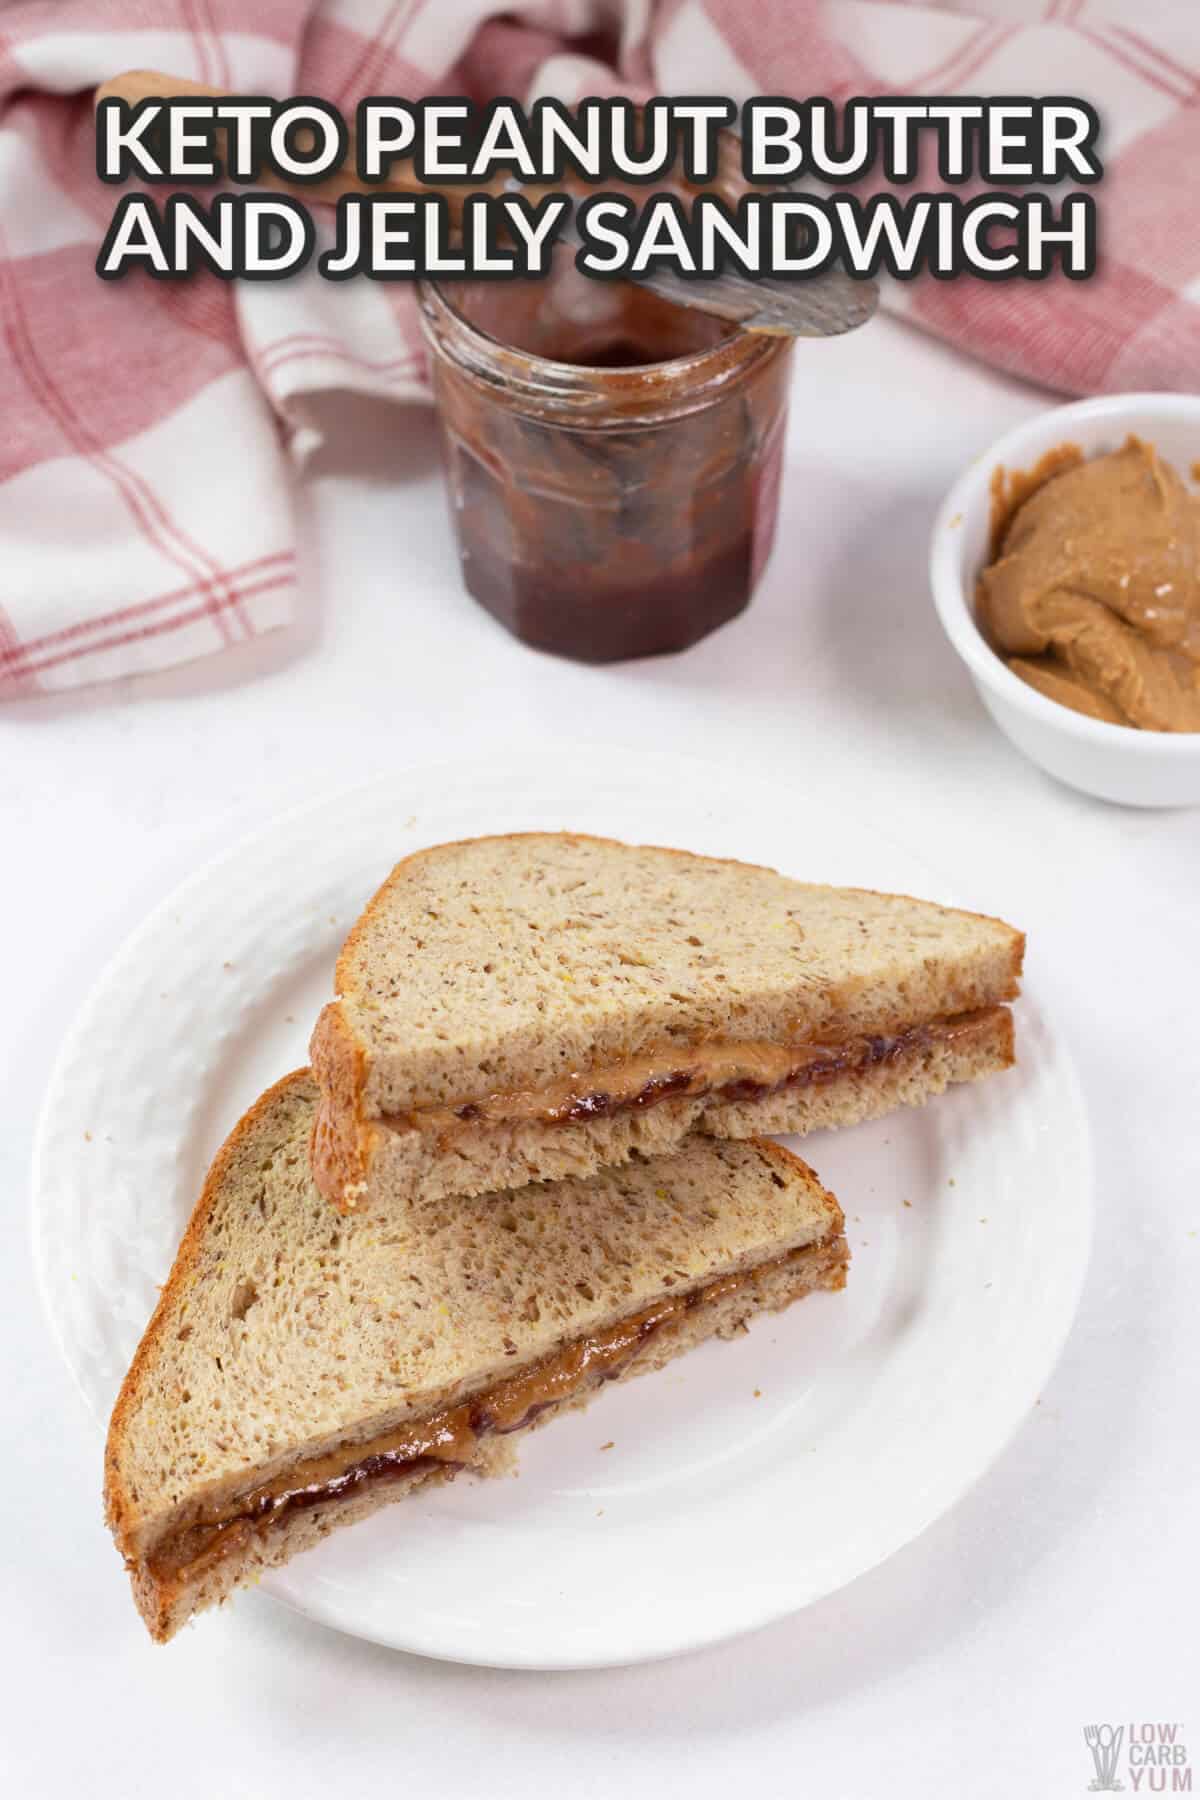 keto peanut butter and jelly pinterest image.